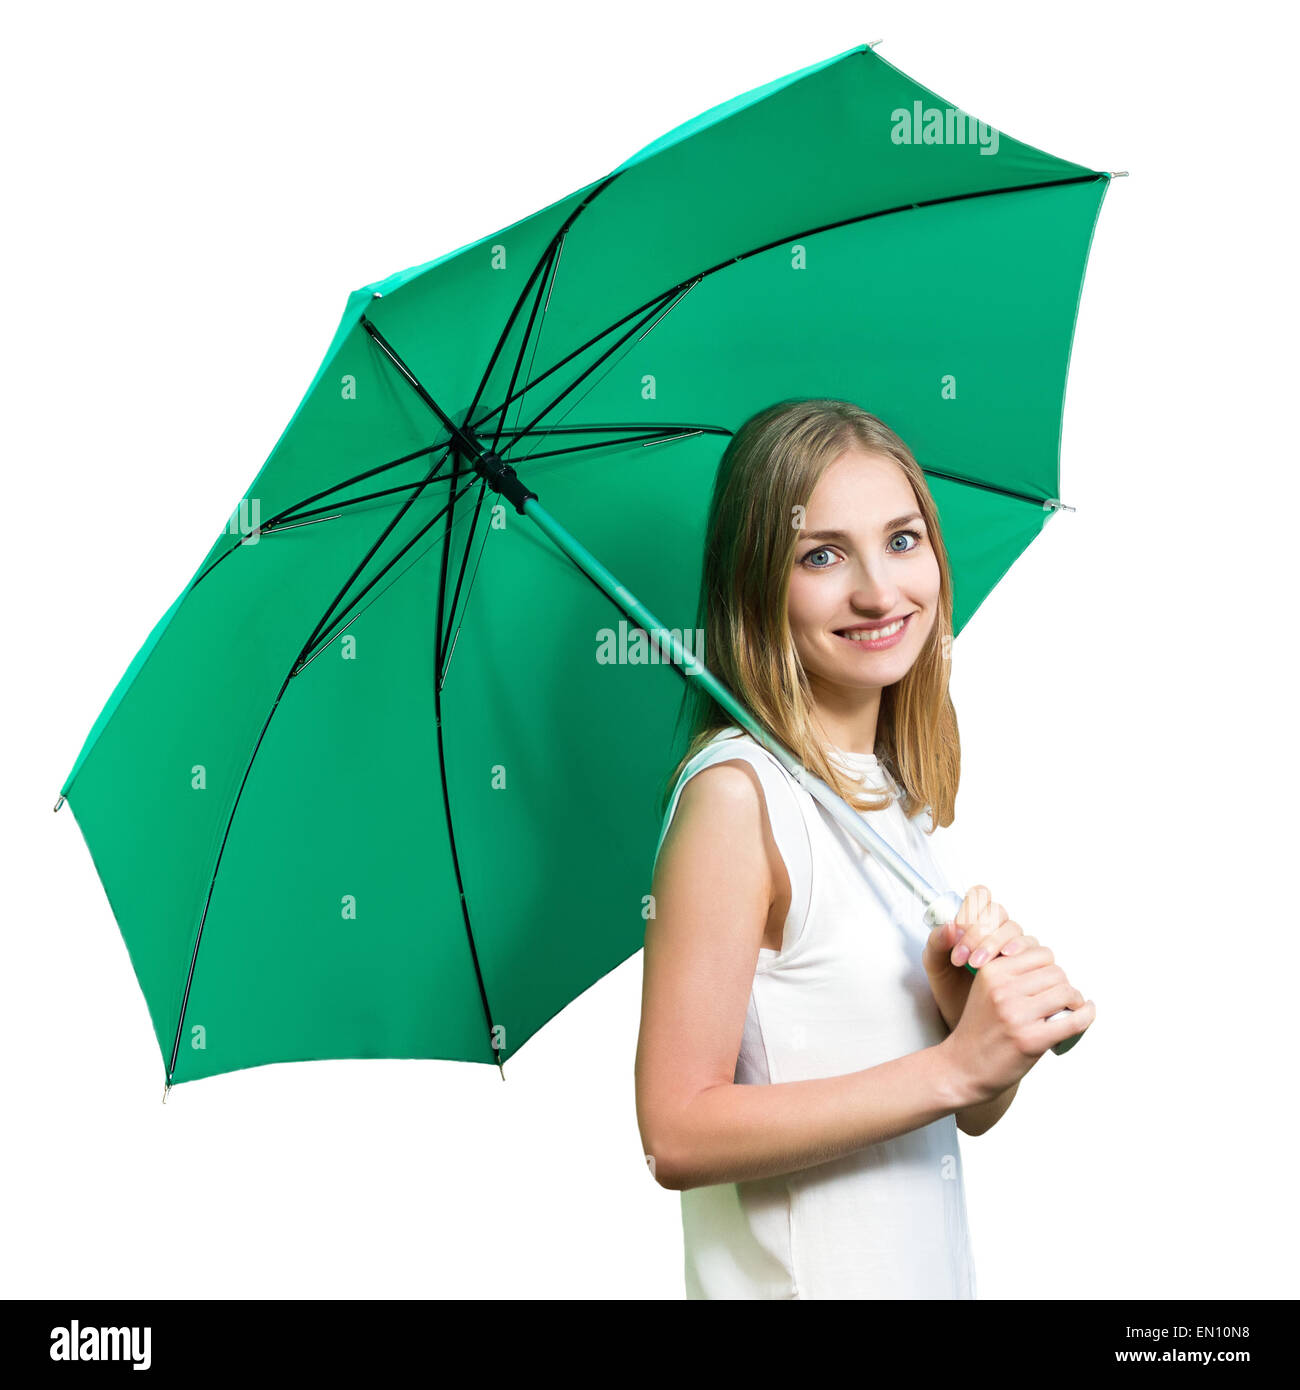 Beautiful smiling girl holding a green umbrella isolated on whit Stock Photo